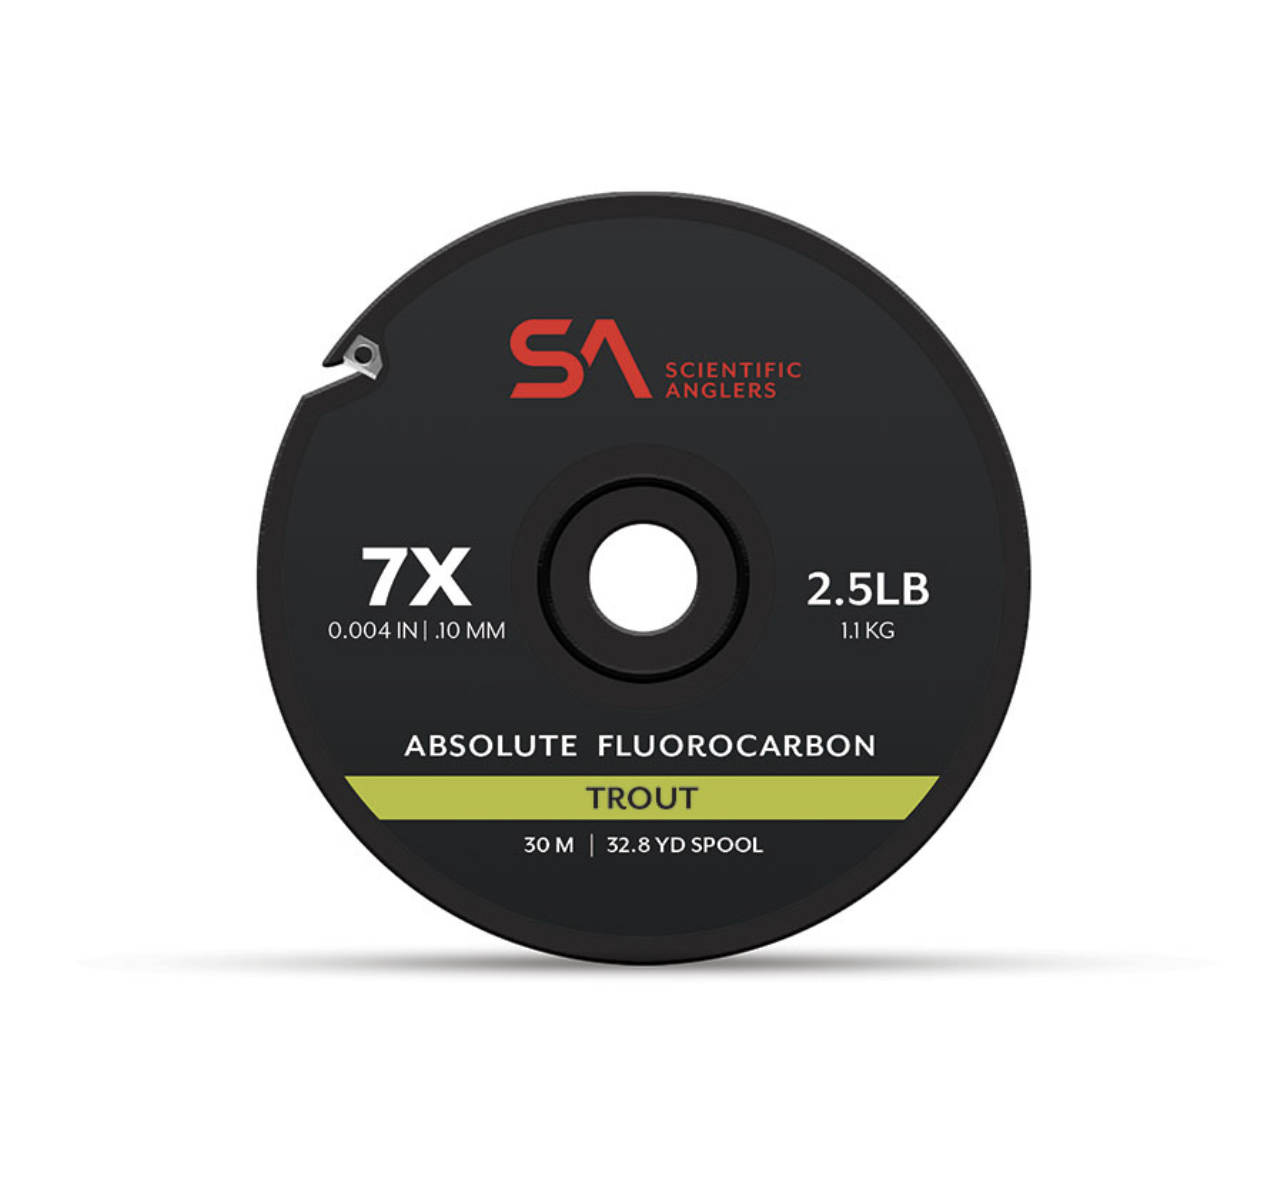 Scientific Anglers Absolute Fluorocarbon Trout Tippet - 100m - 5X - 4.6lb